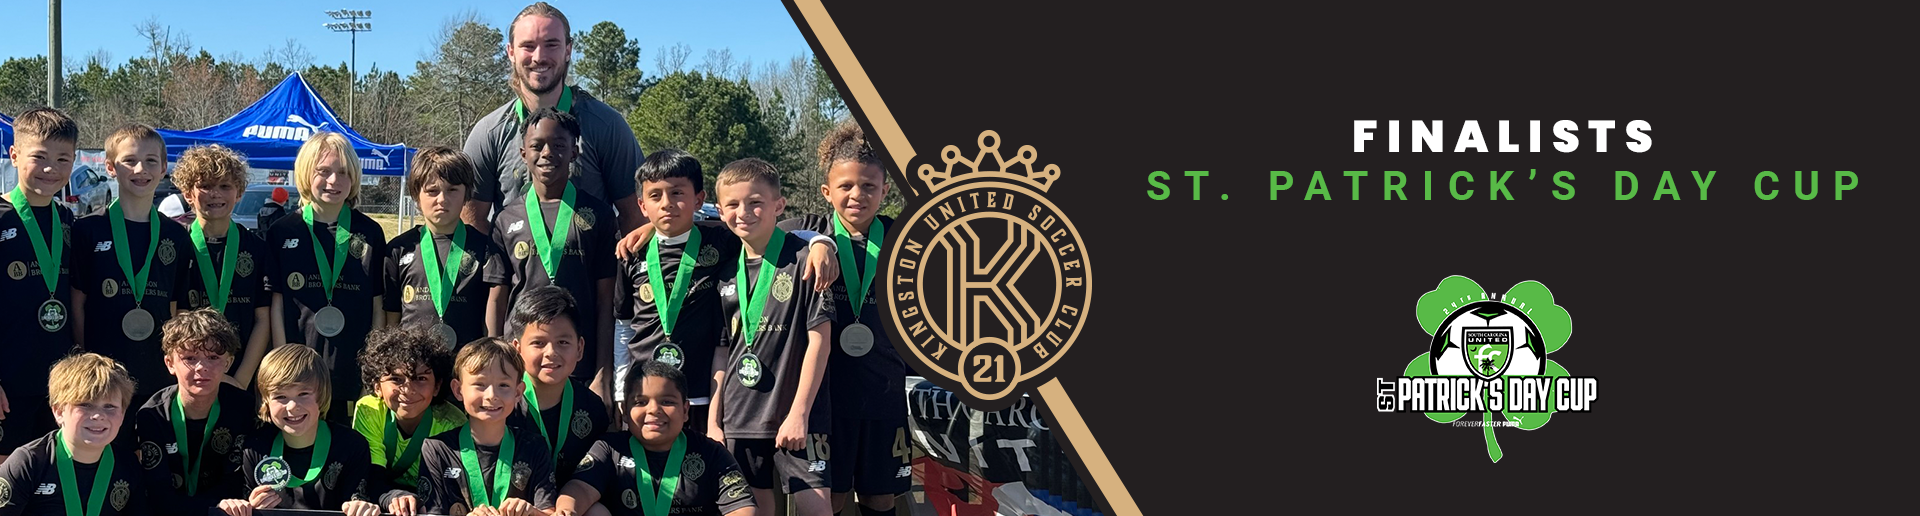 Kingston Finalists at St. Patrick's Day Cup